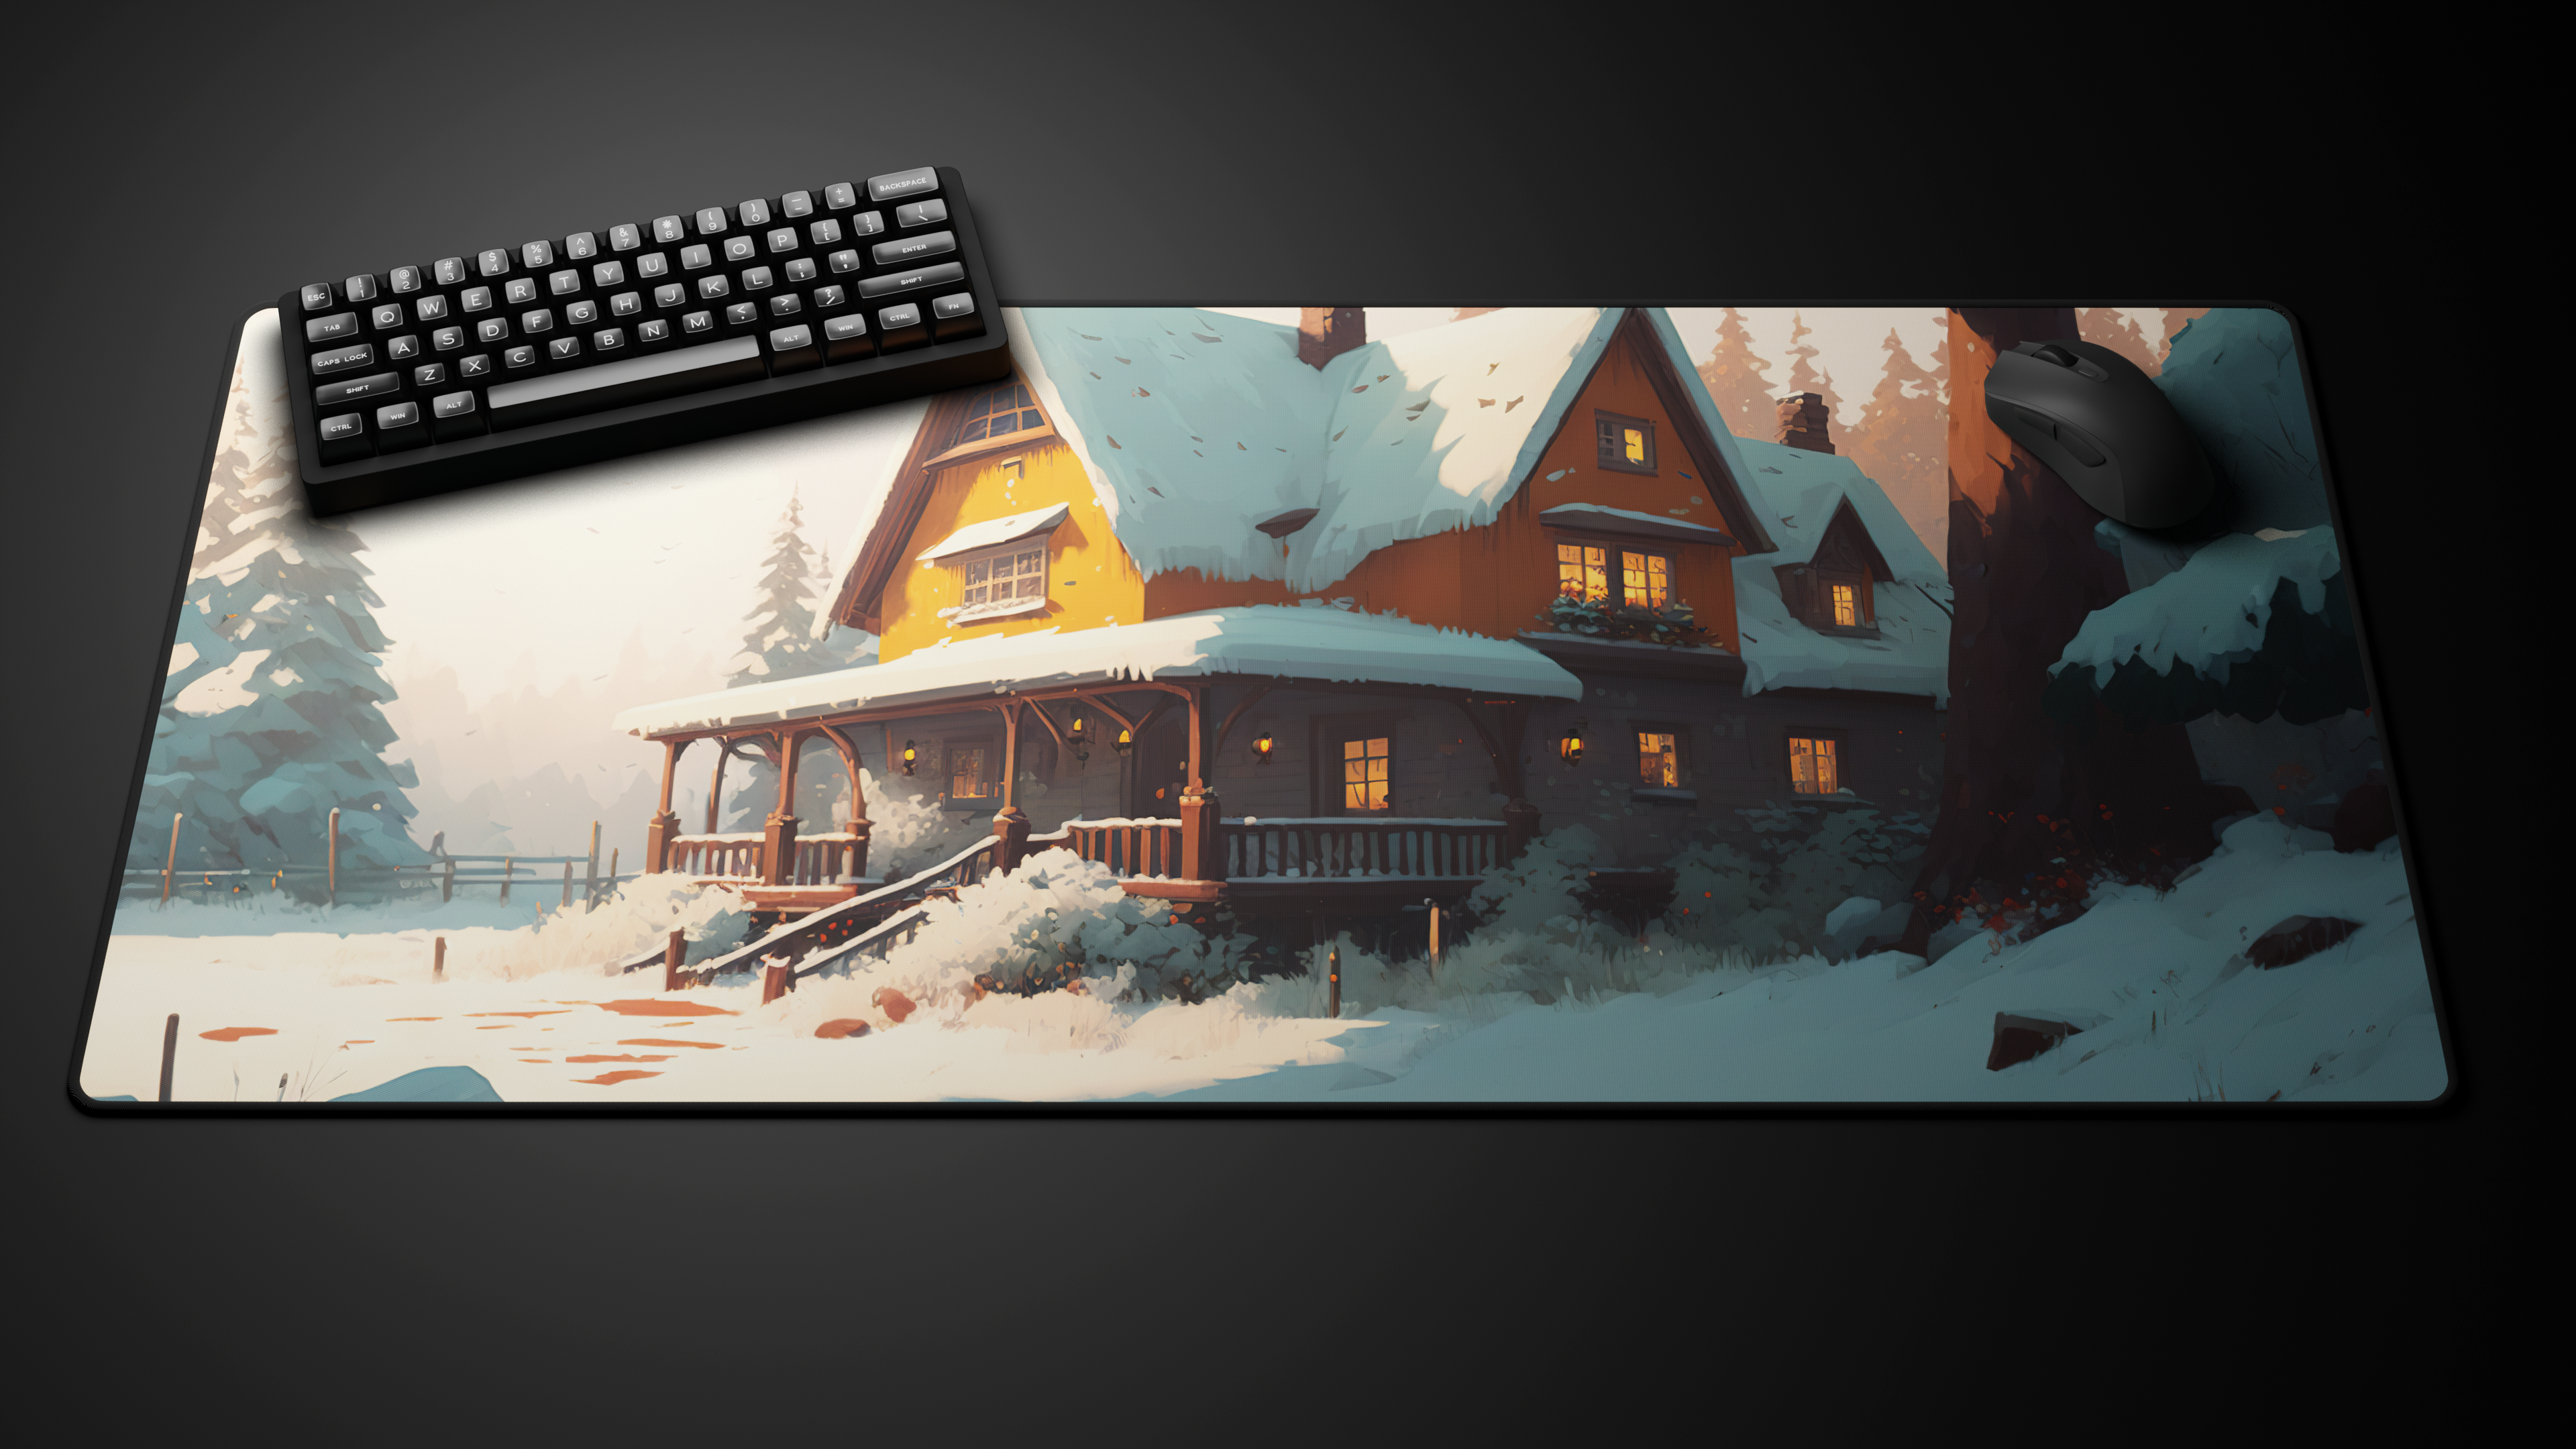 Deskmat 'Winter Collection - Snowy Cottage' by glutch